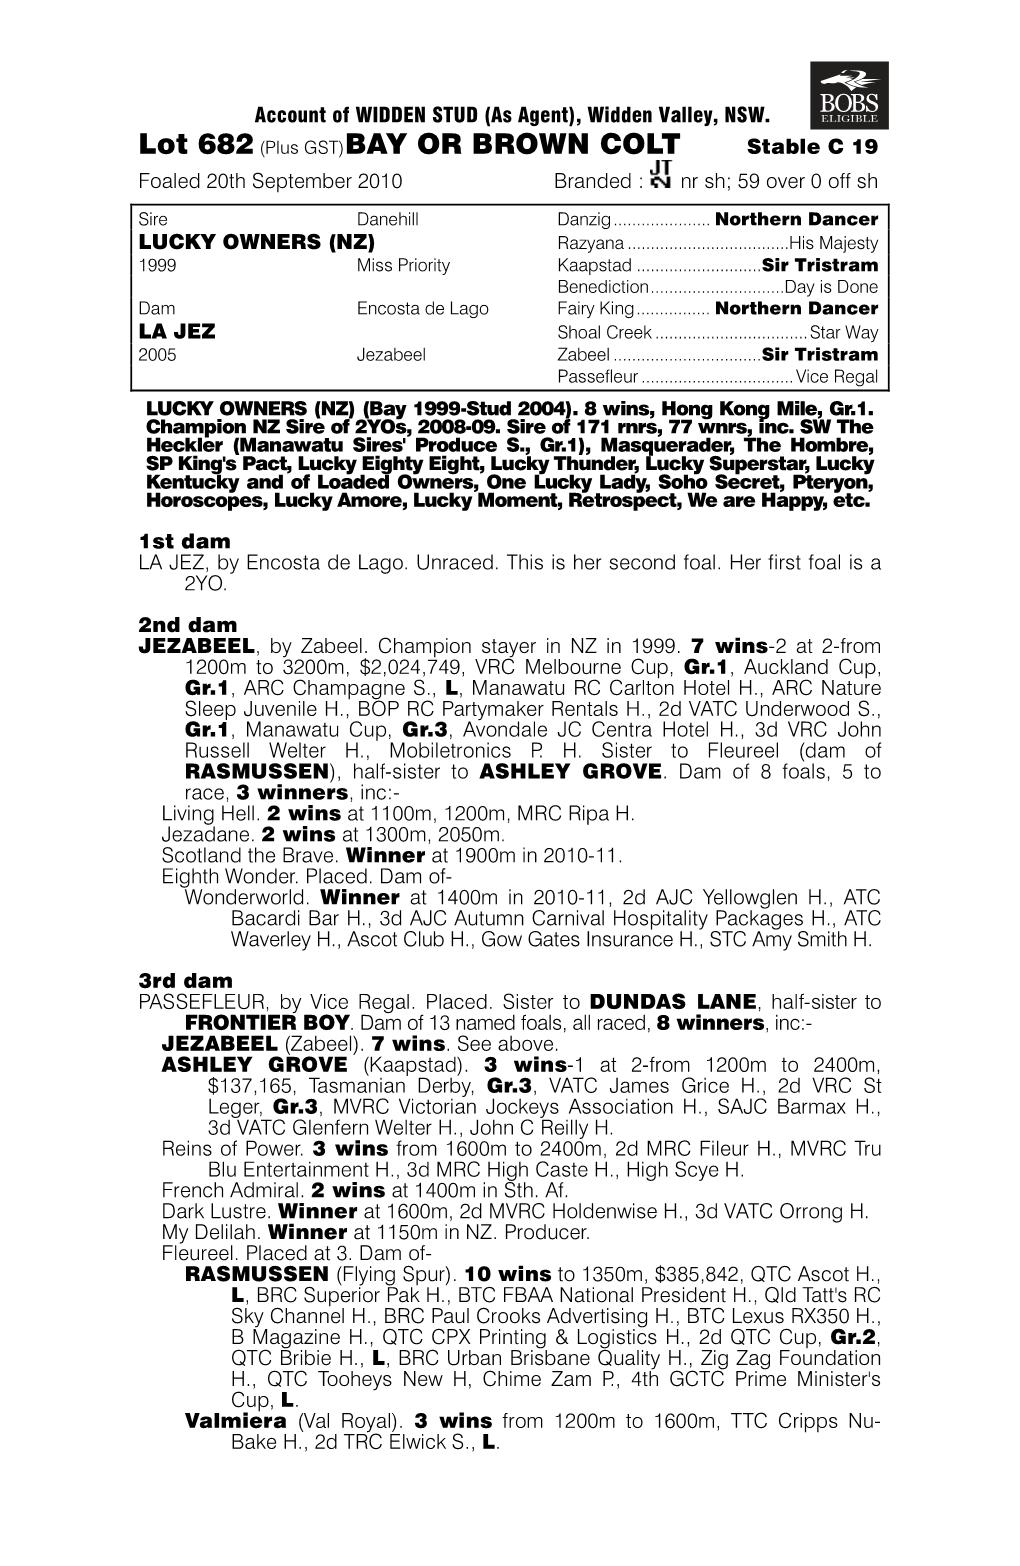 Lot 682 (Plus GST)BAY OR BROWN COLT Stable C 19 Foaled 20Th September 2010 Branded : Nr Sh; 59 Over 0 Off Sh